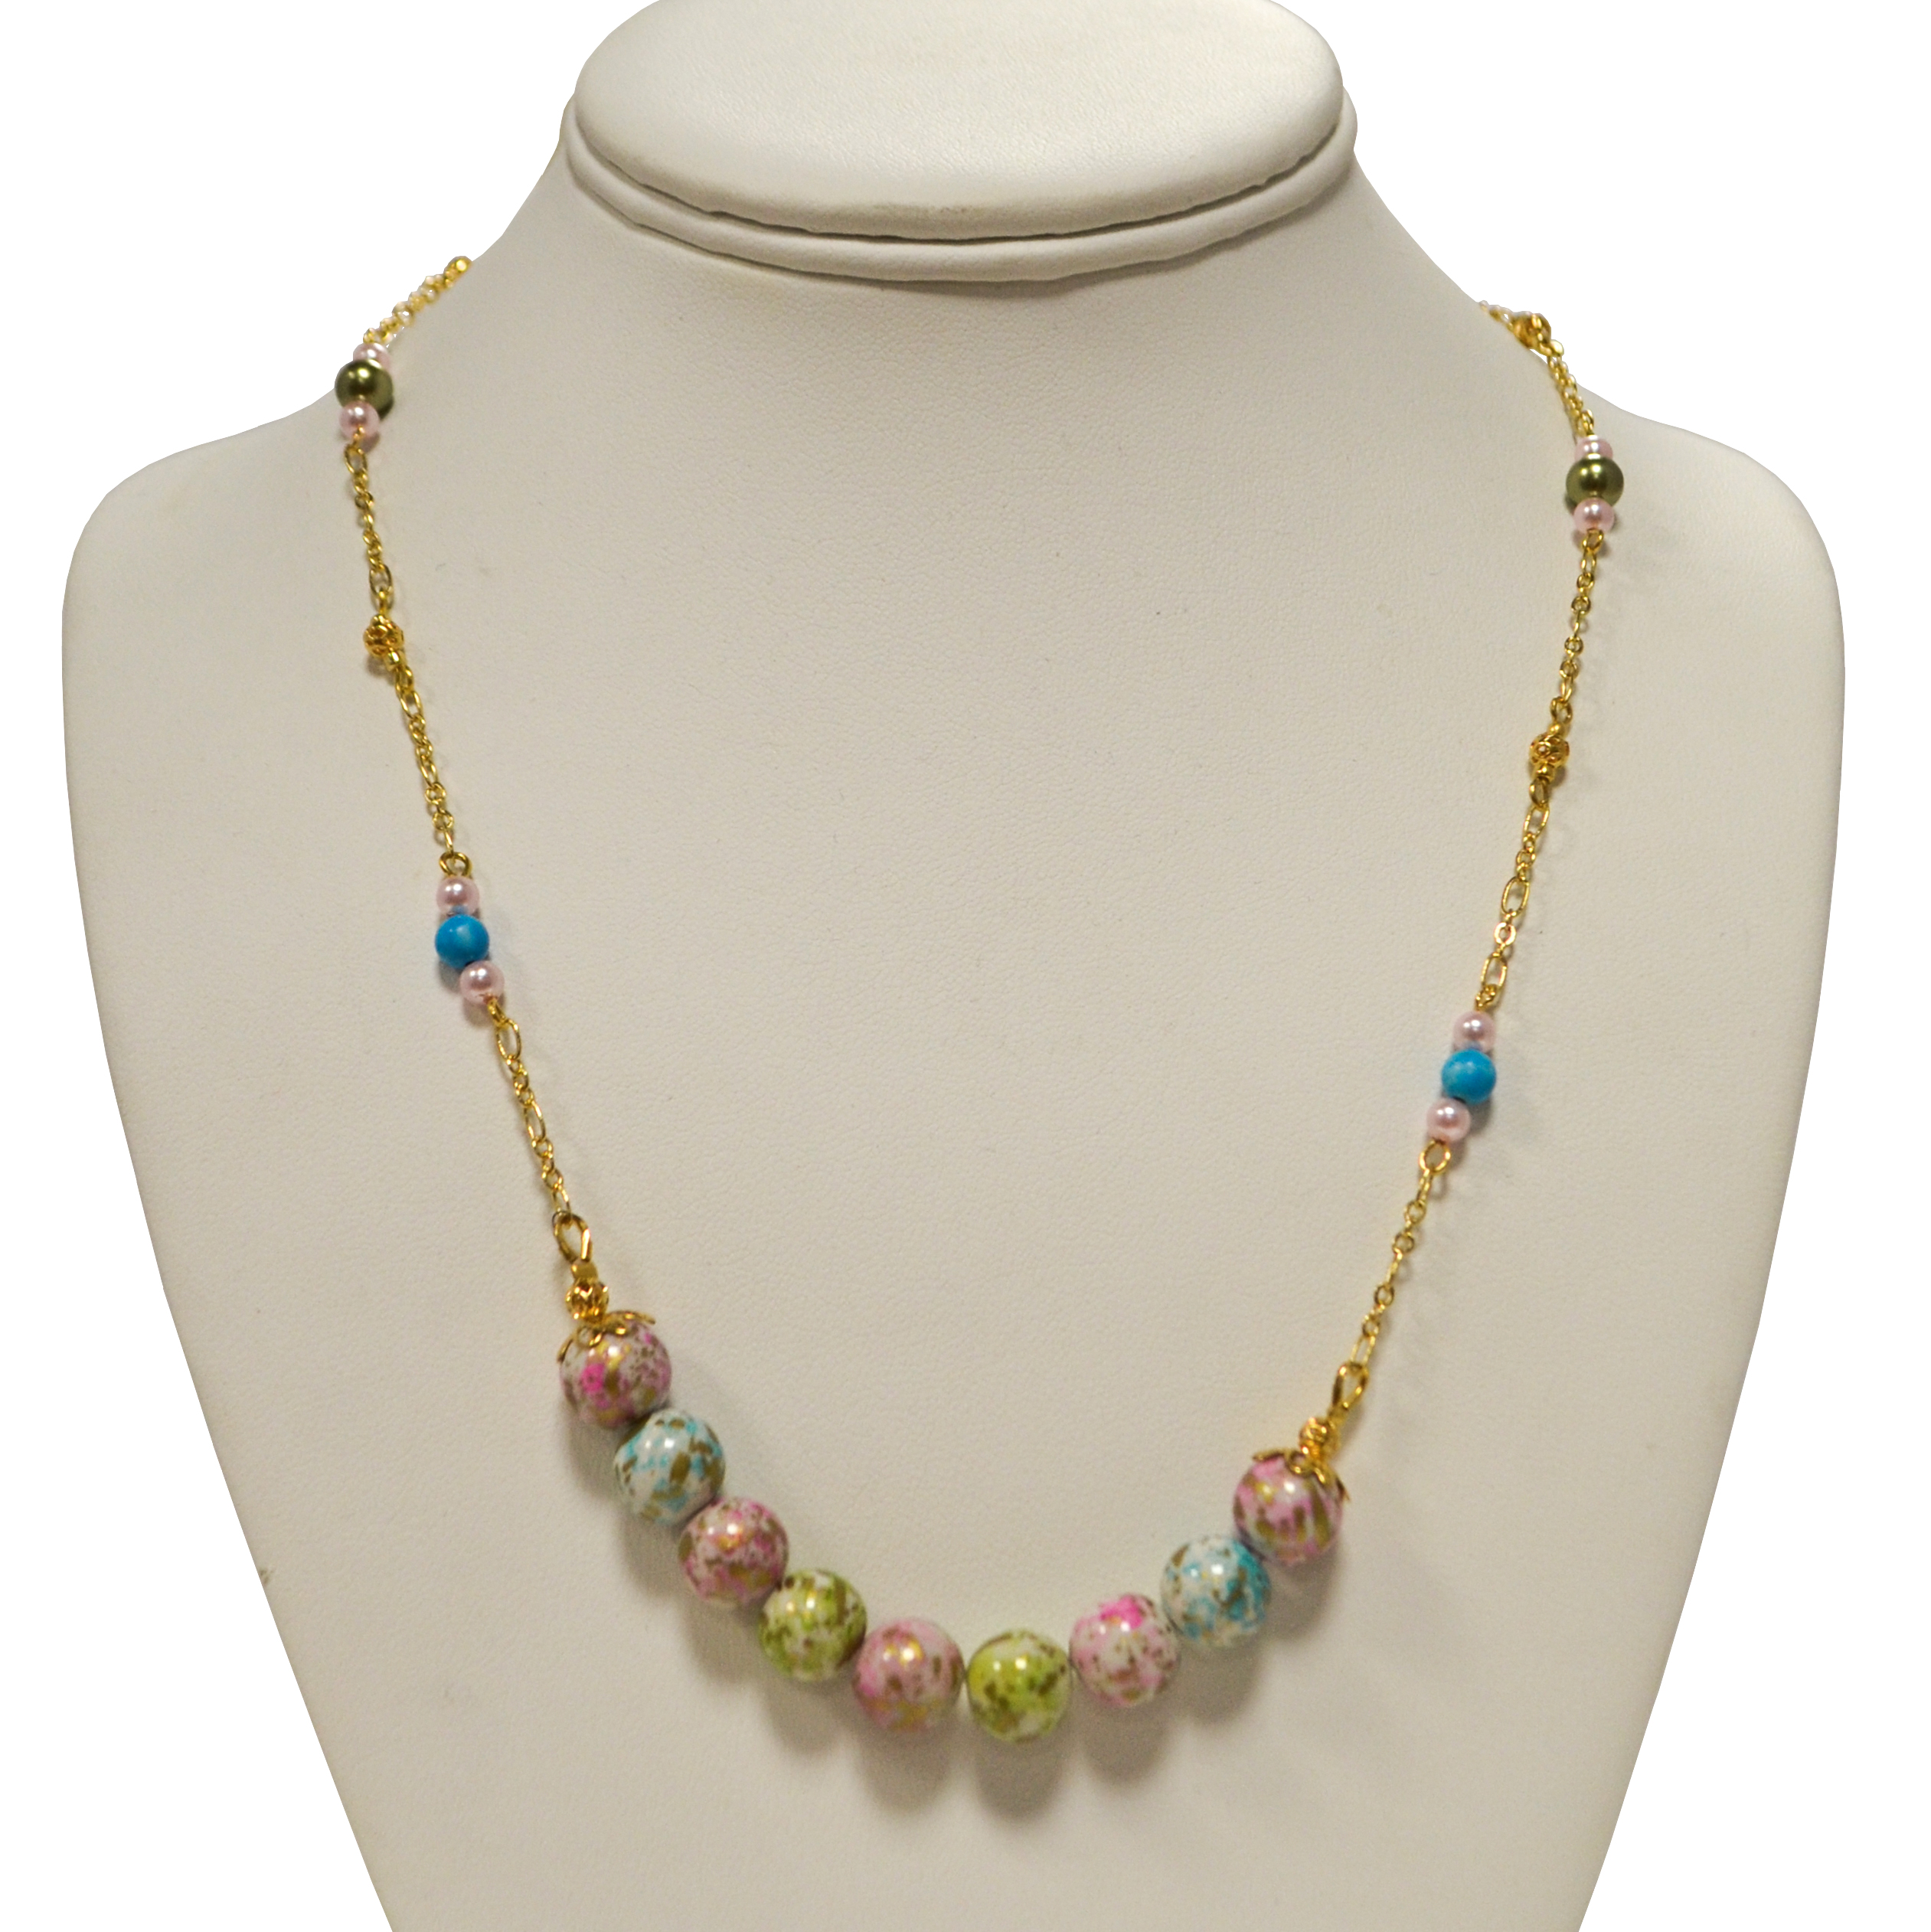 Cotton candy necklace by Judy Phillips